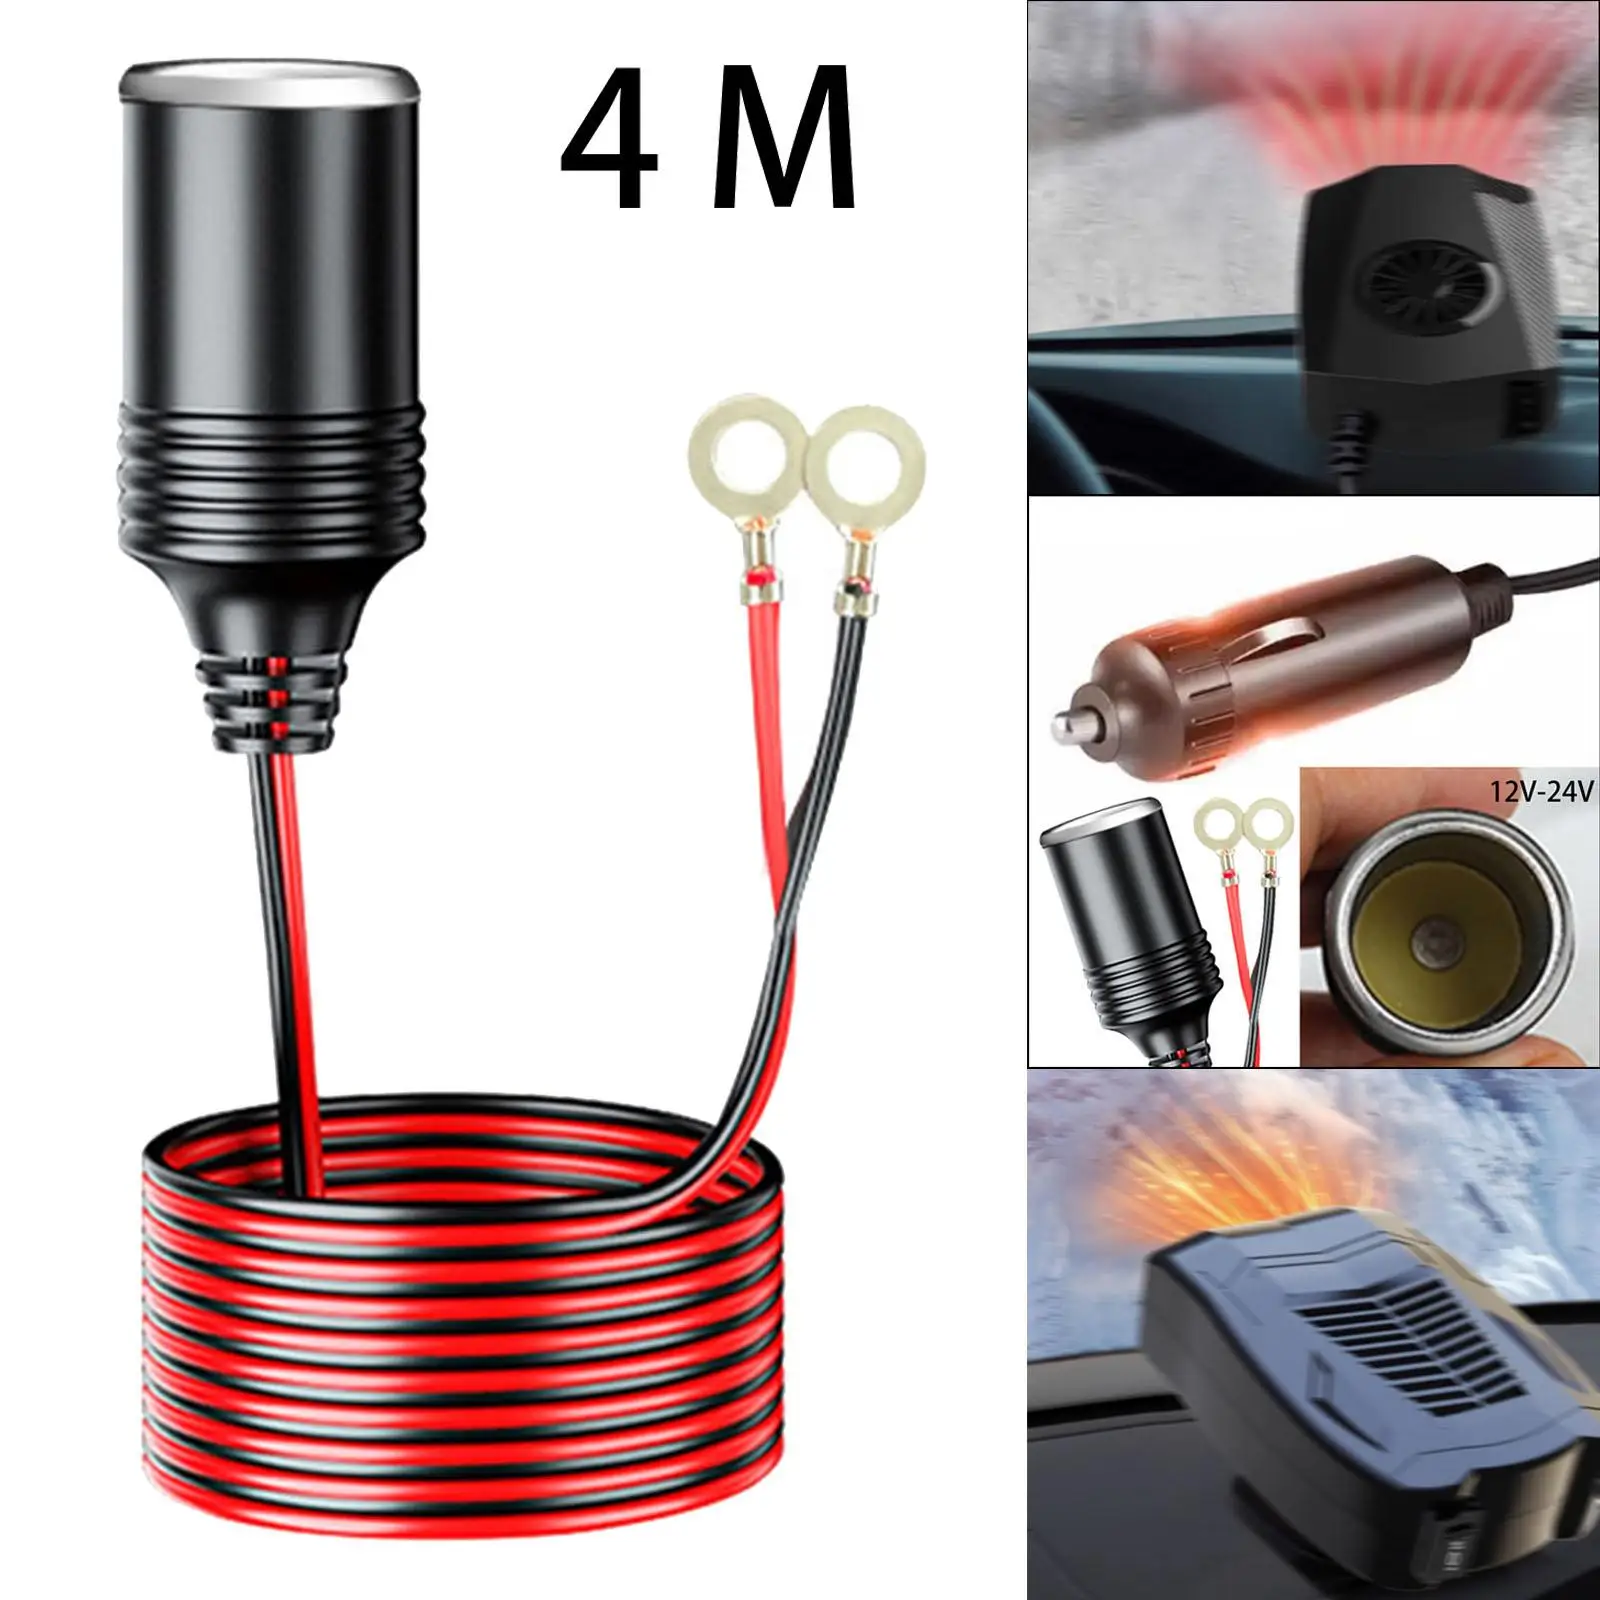 Cigarette Lighter Adapter Power Supply Cord Replacement Easy Installation Power Supply Adapter Heavy Duty 12V 24V Female Plug